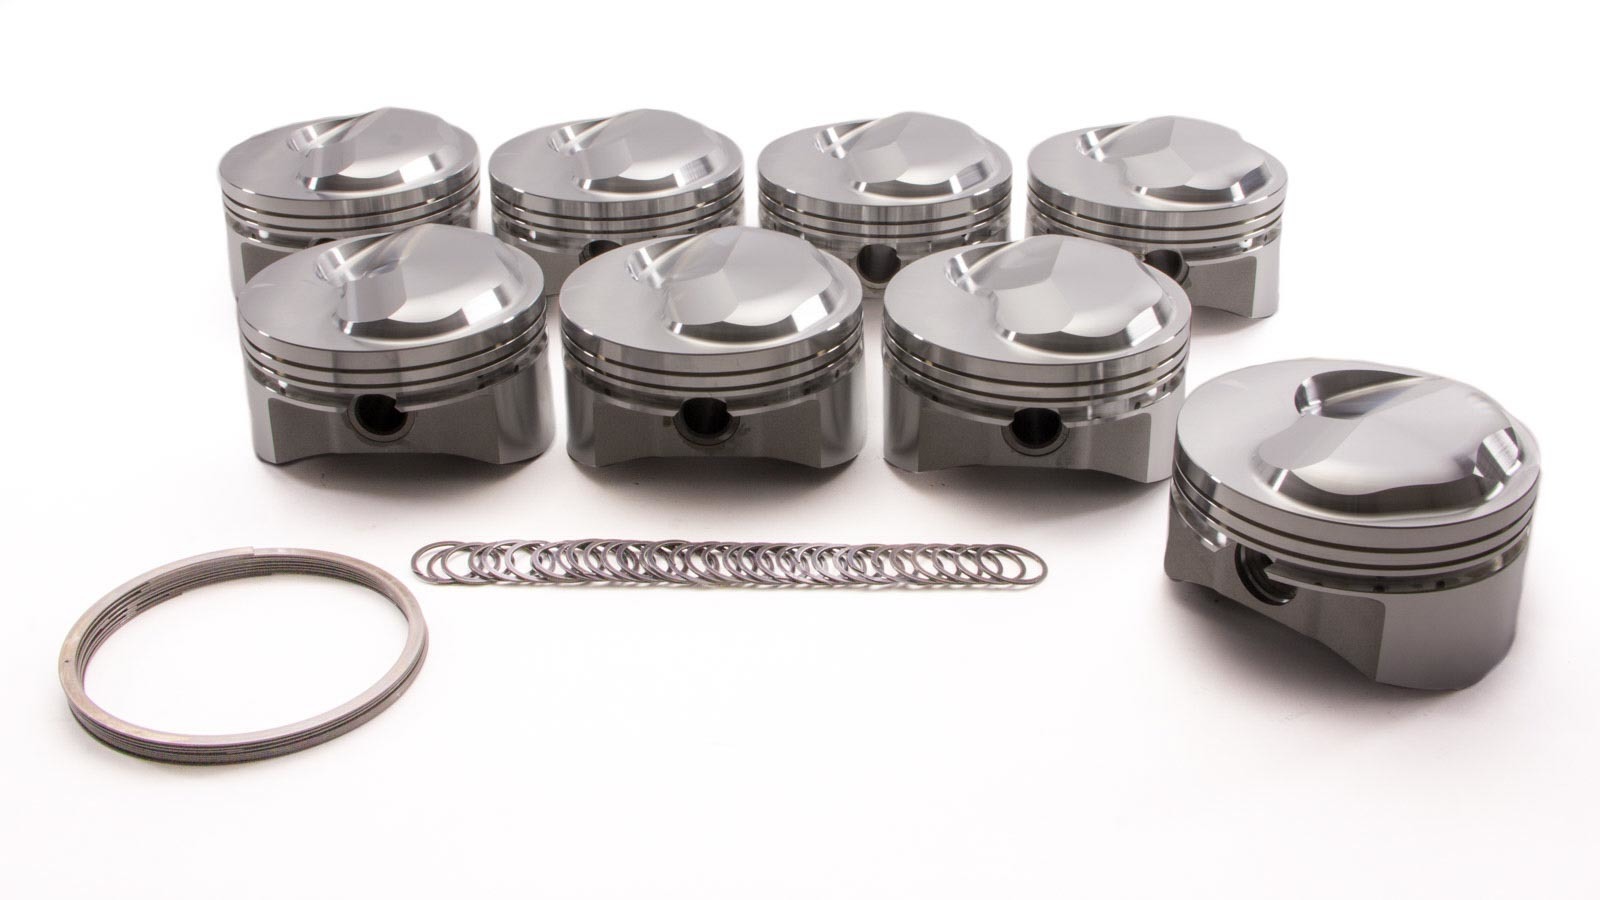 SRP Pistons 152157 Piston, BBC High Compression Dome, Forged, 4.600 in Bore, 1/16 x 1/16 x 3/16 in Ring Grooves, Plus 33.00 cc, Big Block Chevy, Set of 8